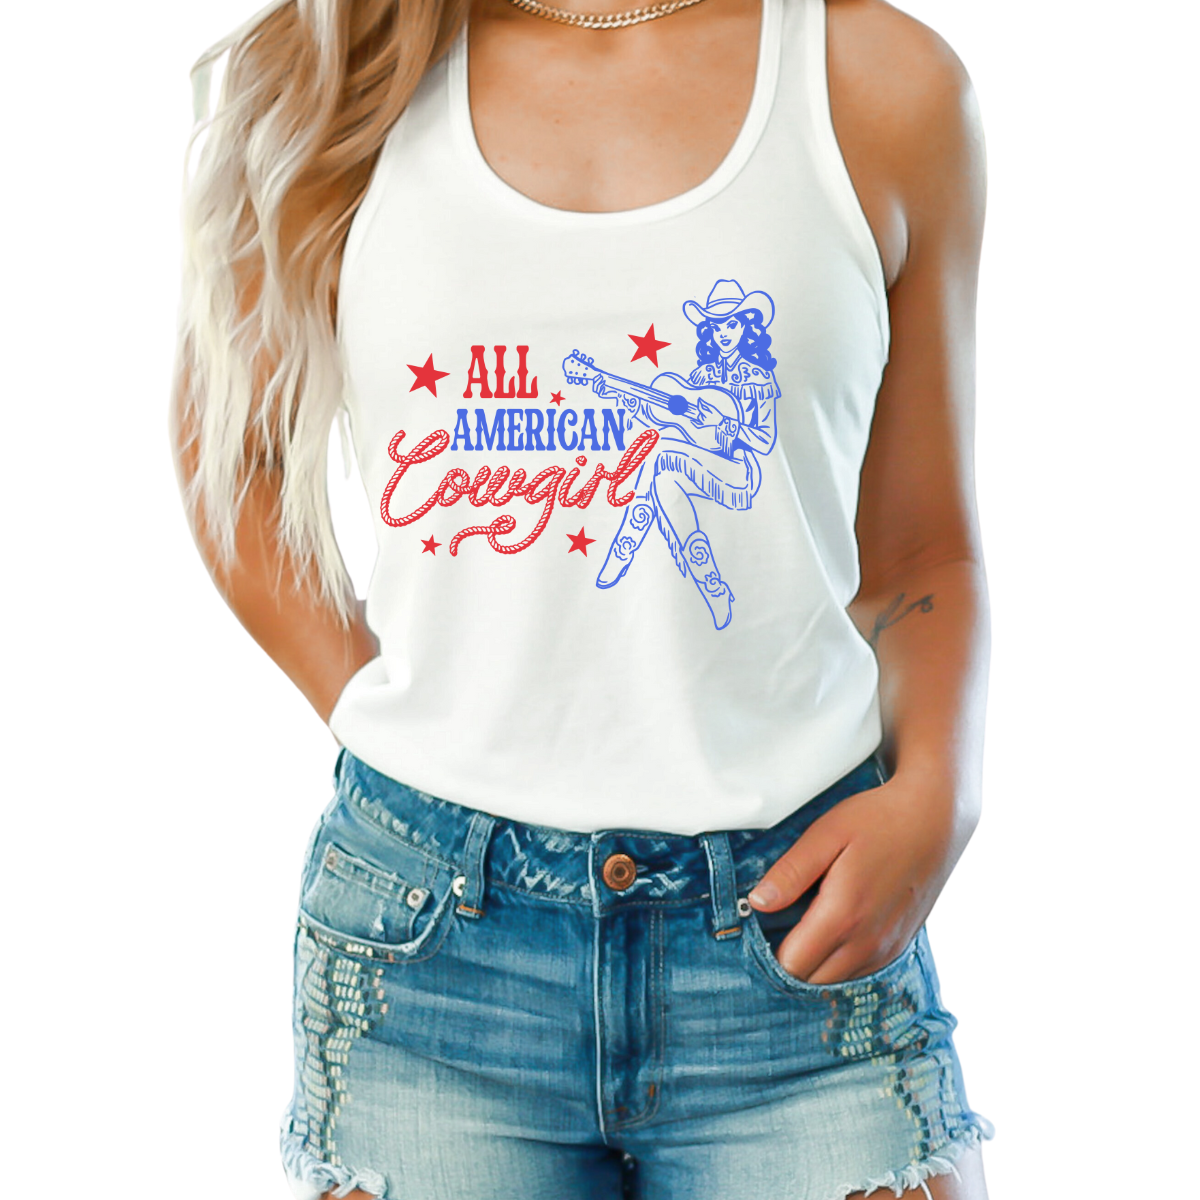 All American Cowgirl